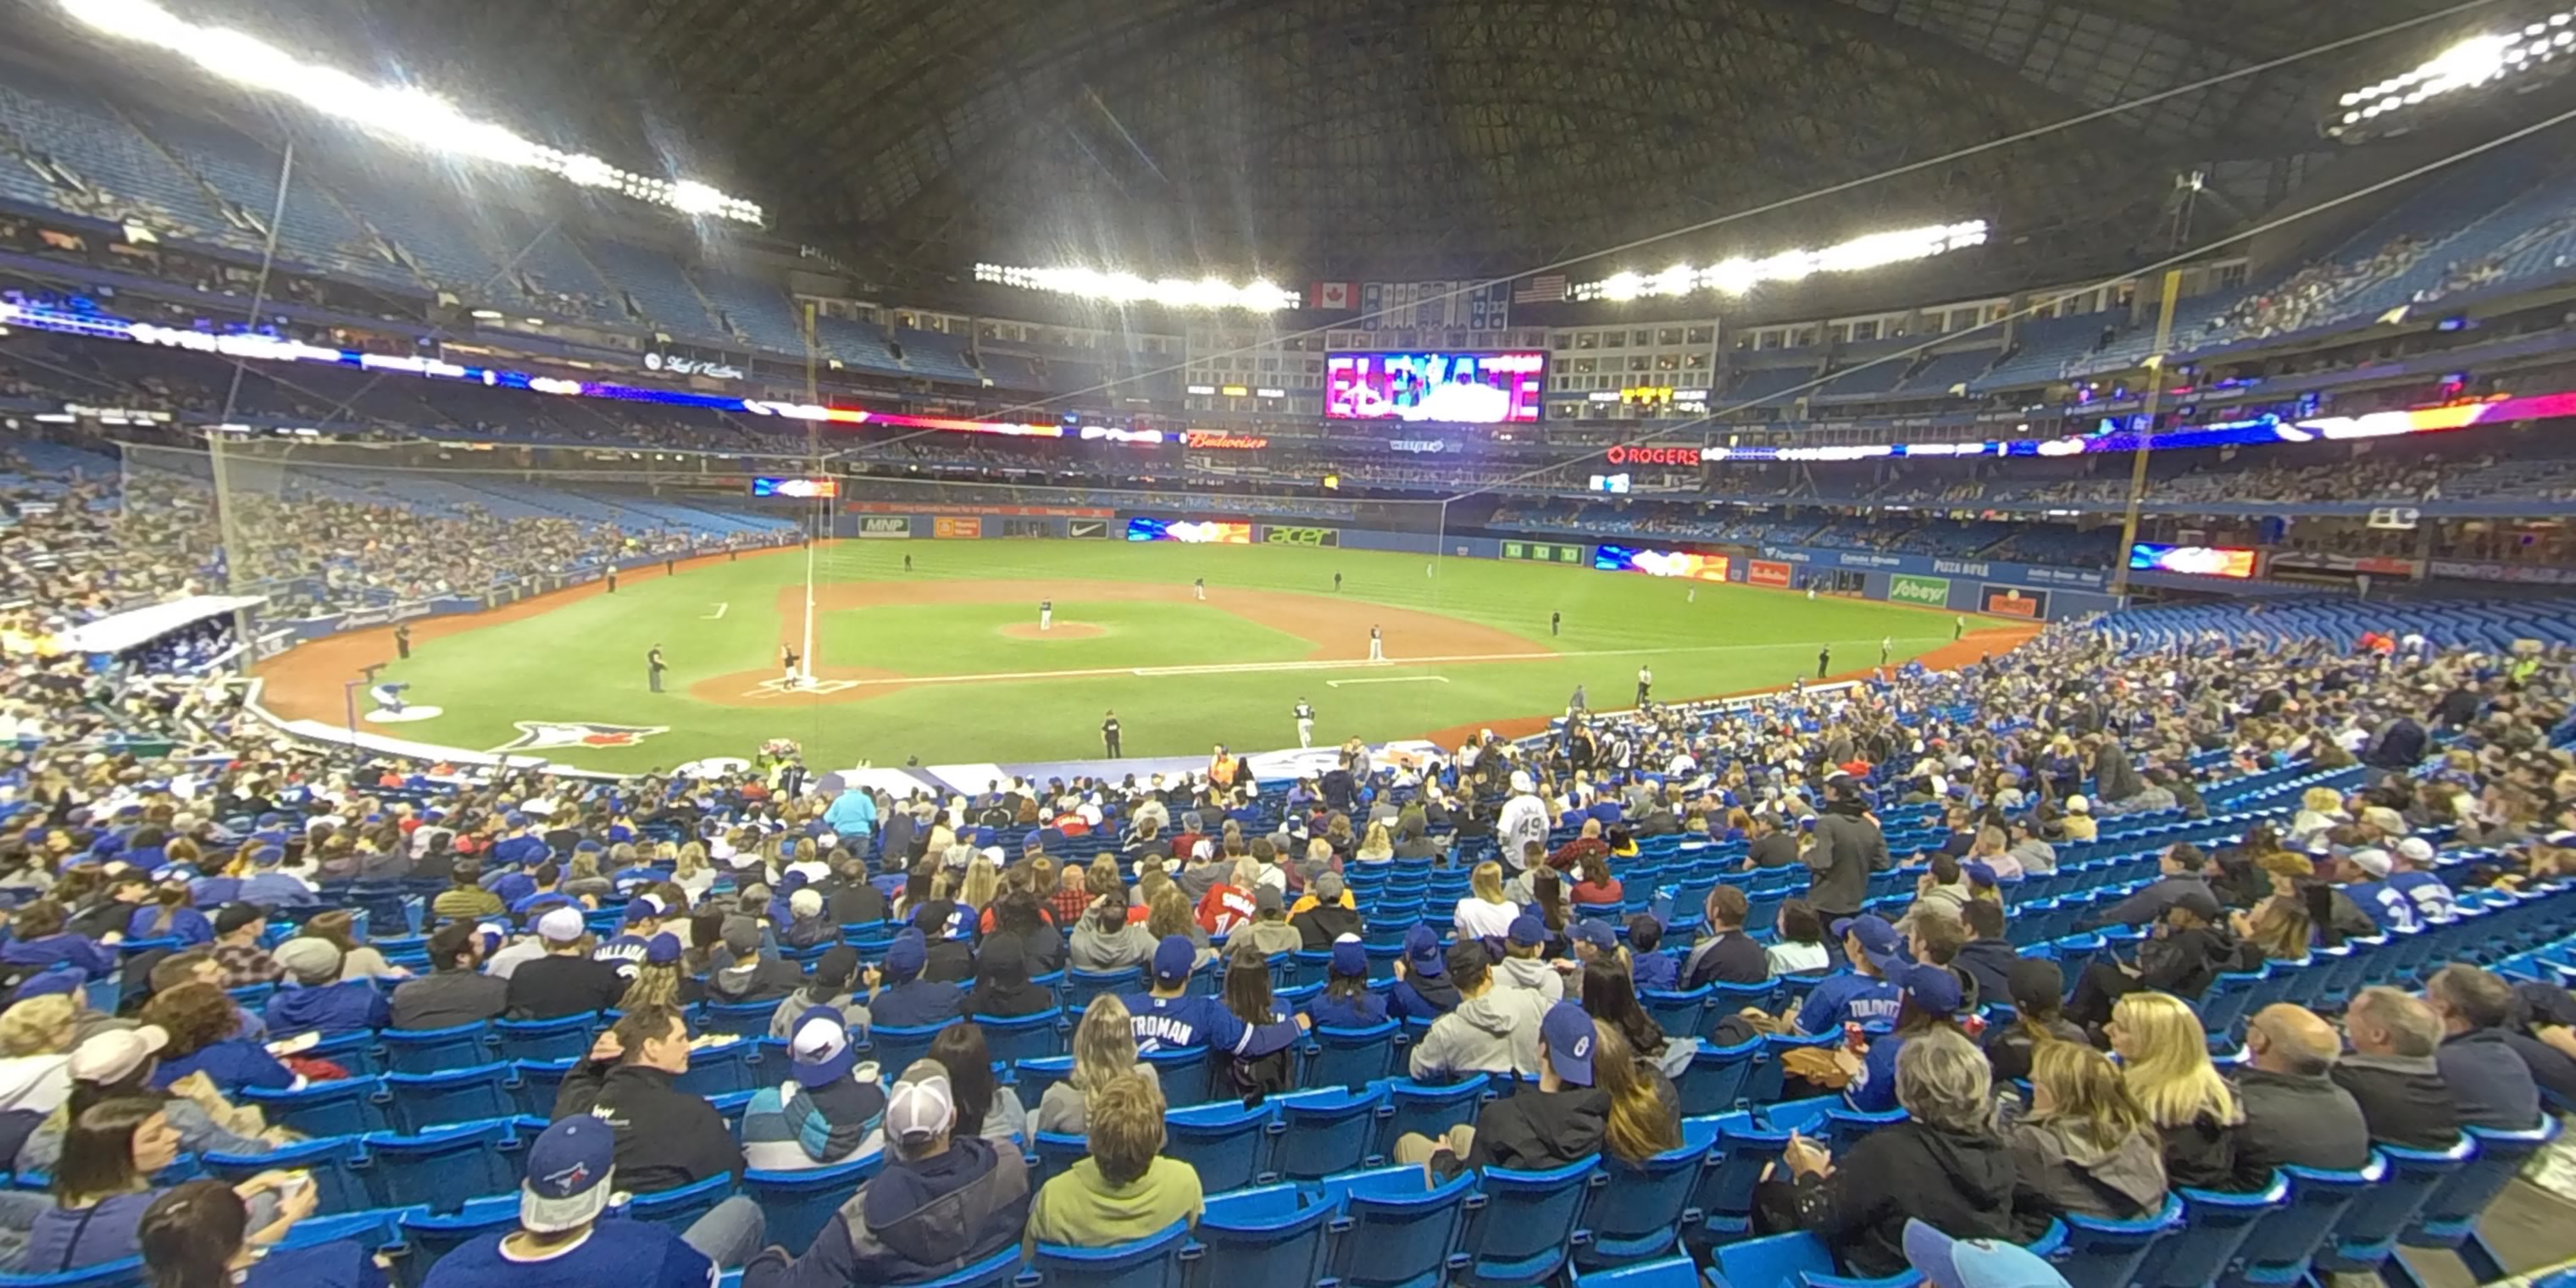 Section 119 at Rogers Centre 